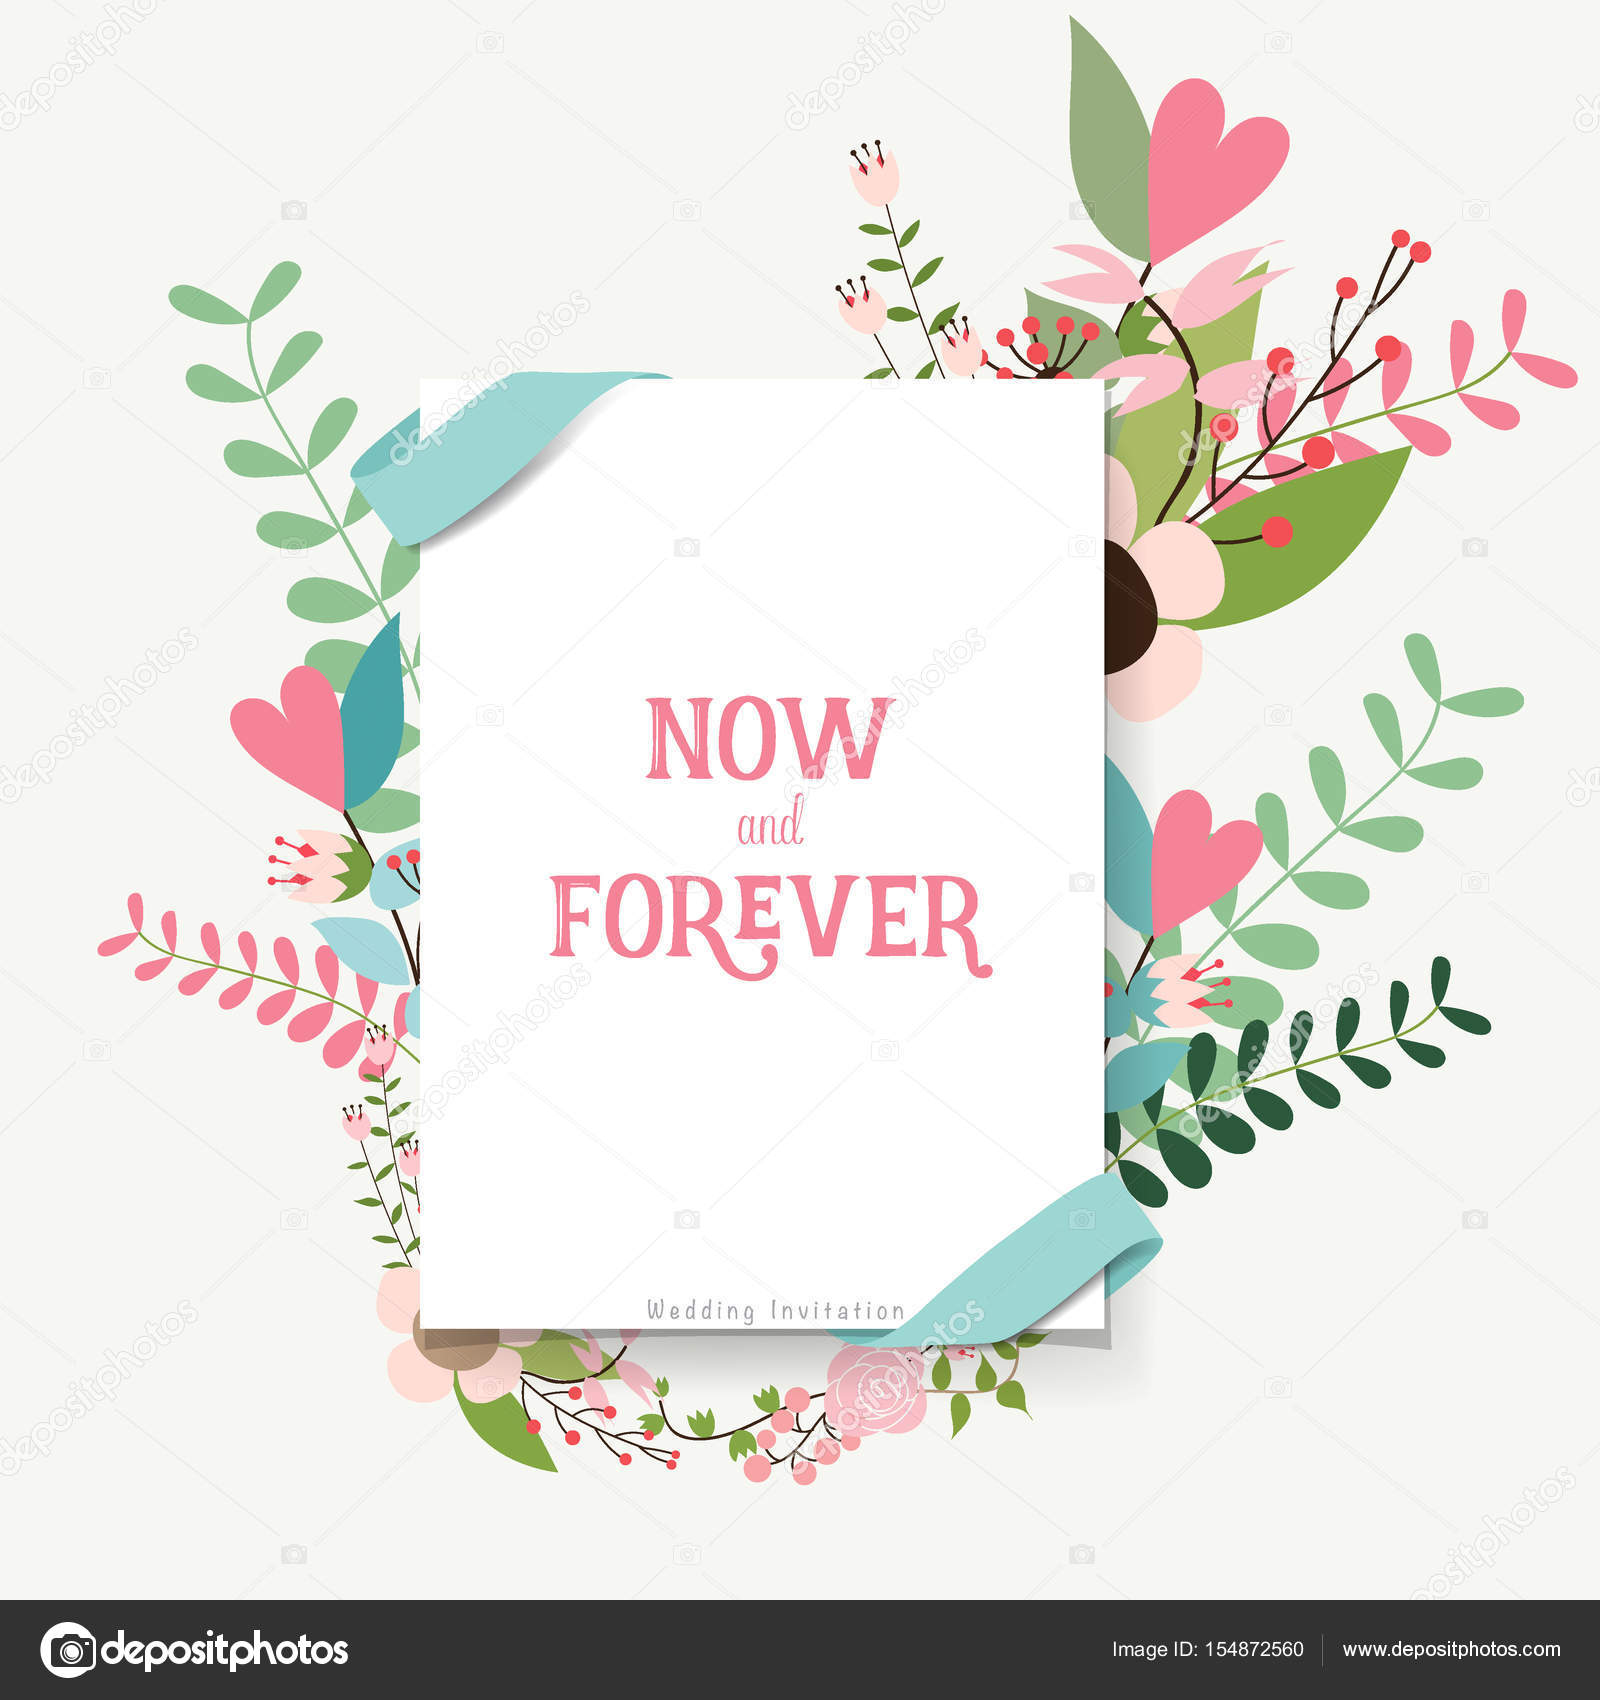 Wedding Invitation Card Design With Cute Flower Templates Vecto